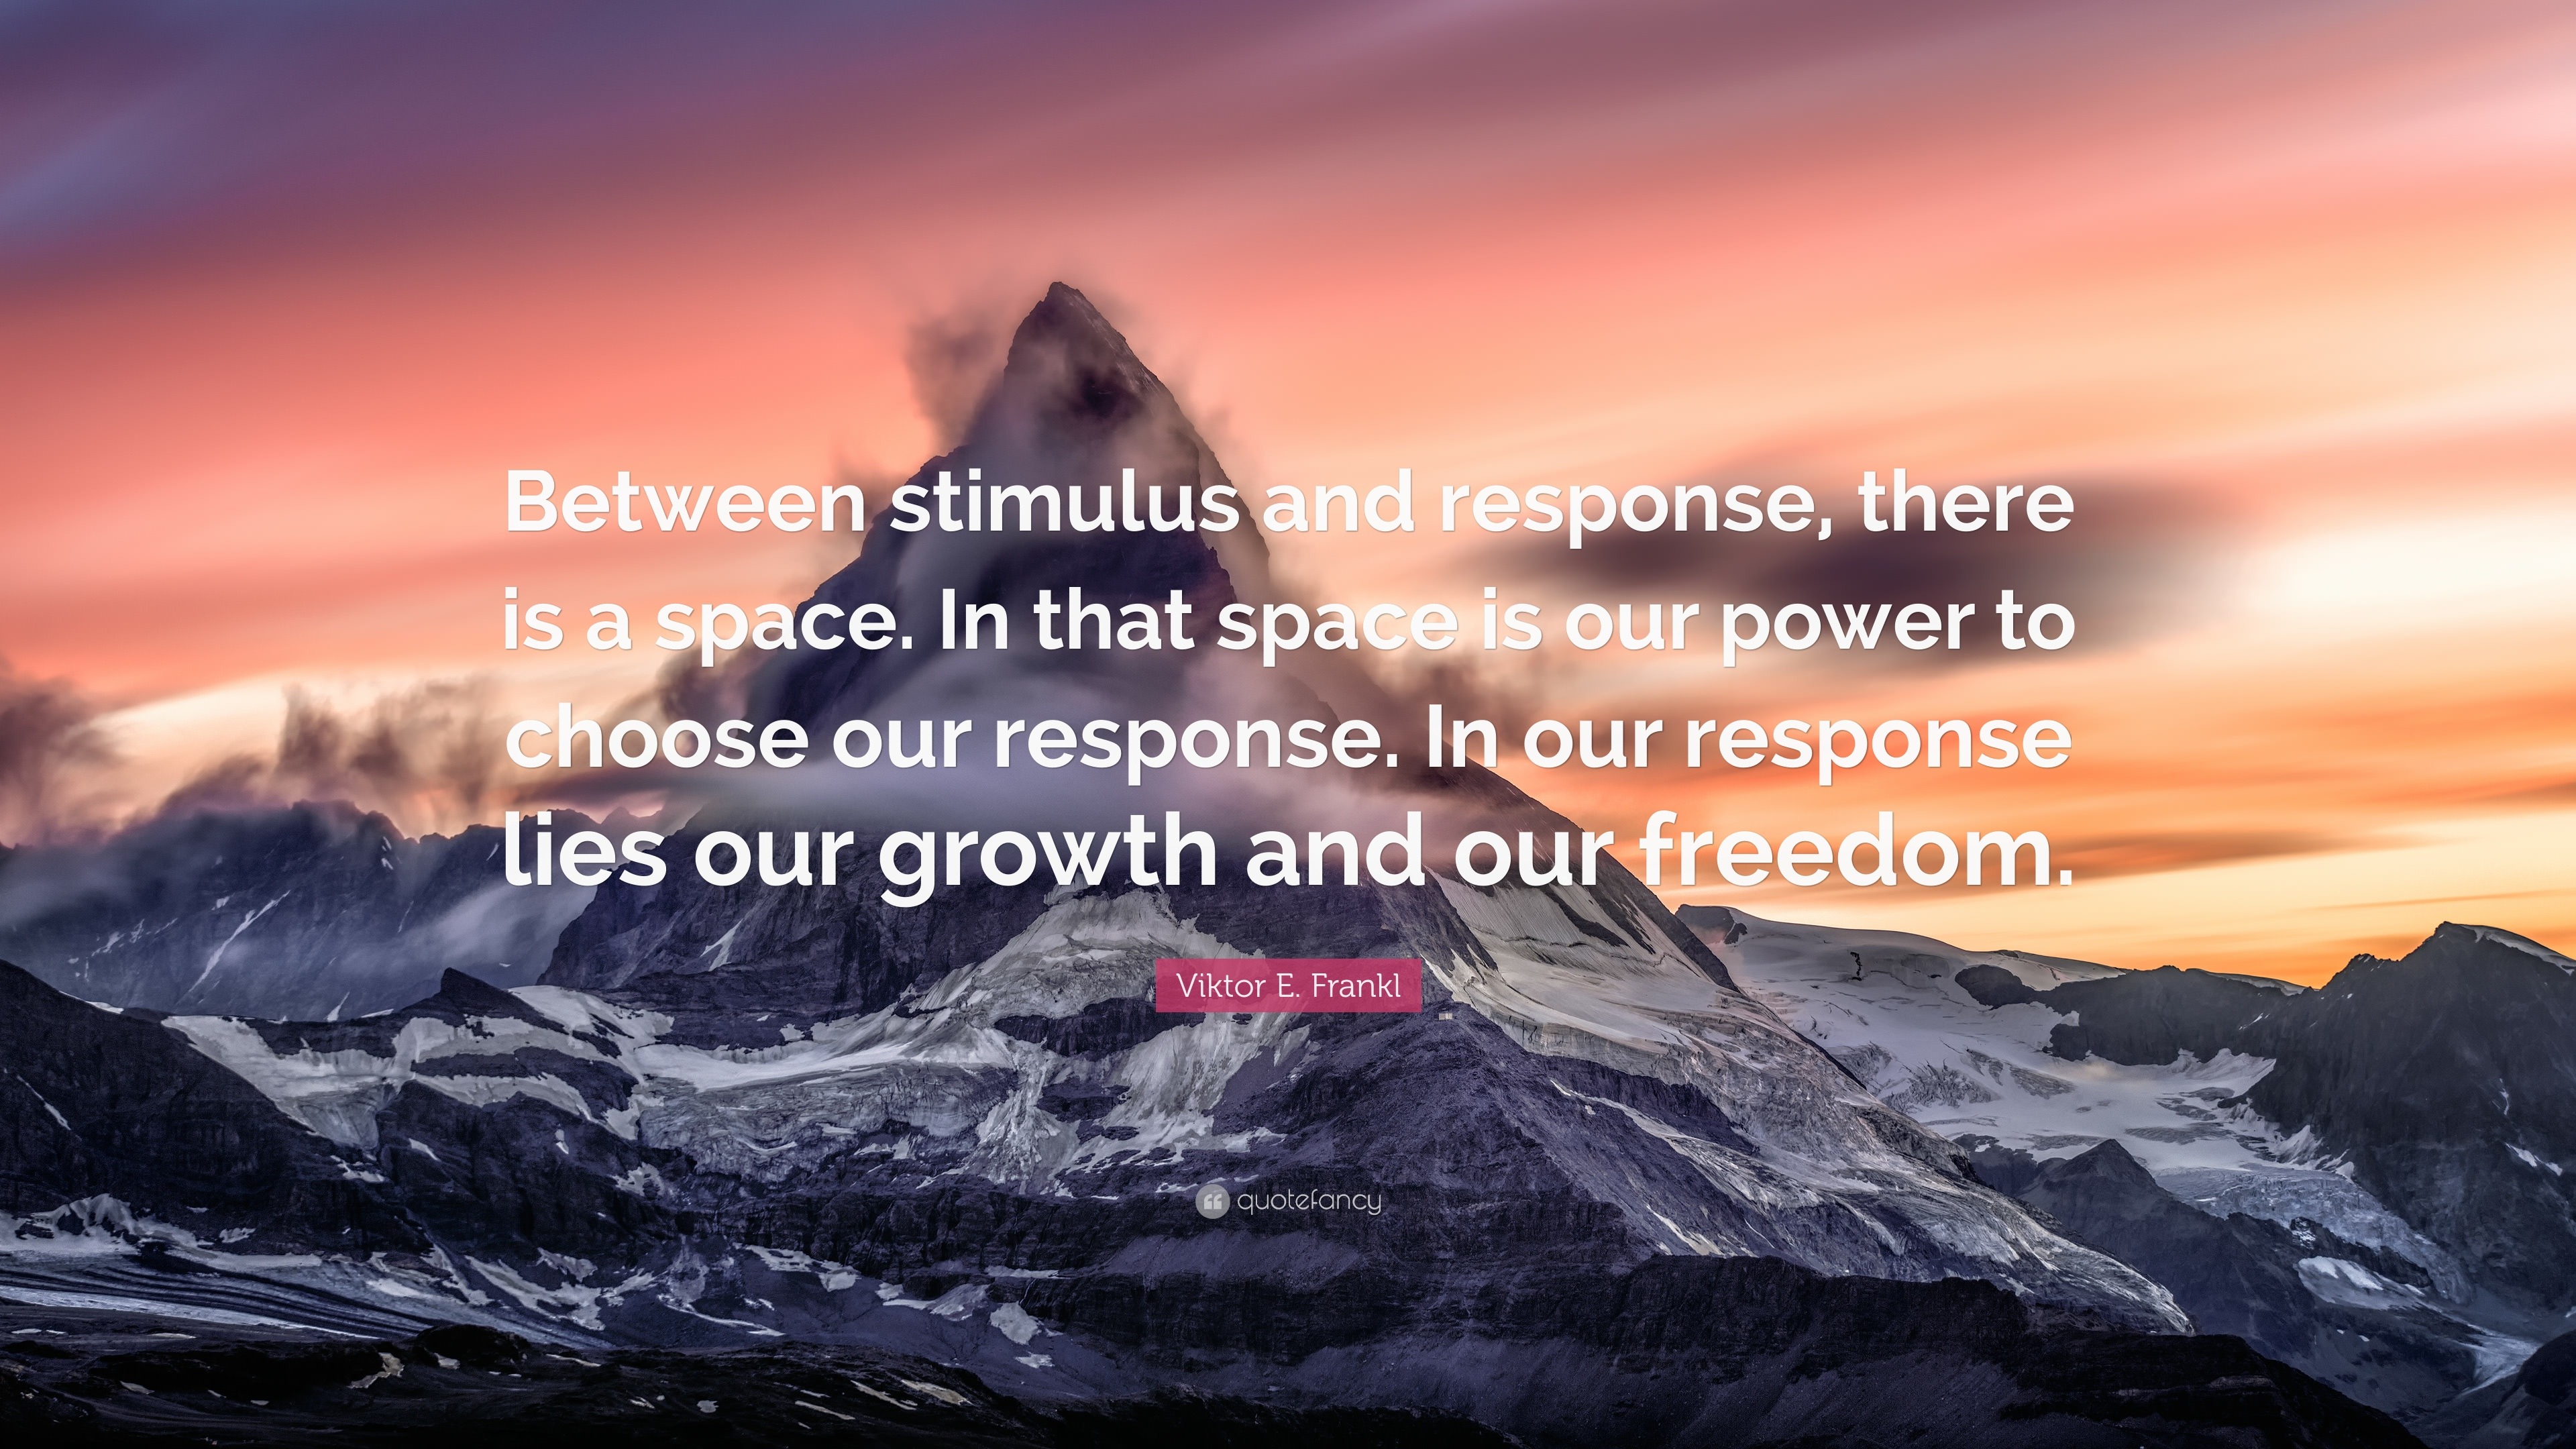 https://quotefancy.com/media/wallpaper/3840x2160/1709691-Viktor-E-Frankl-Quote-Between-stimulus-and-response-there-is-a.jpg